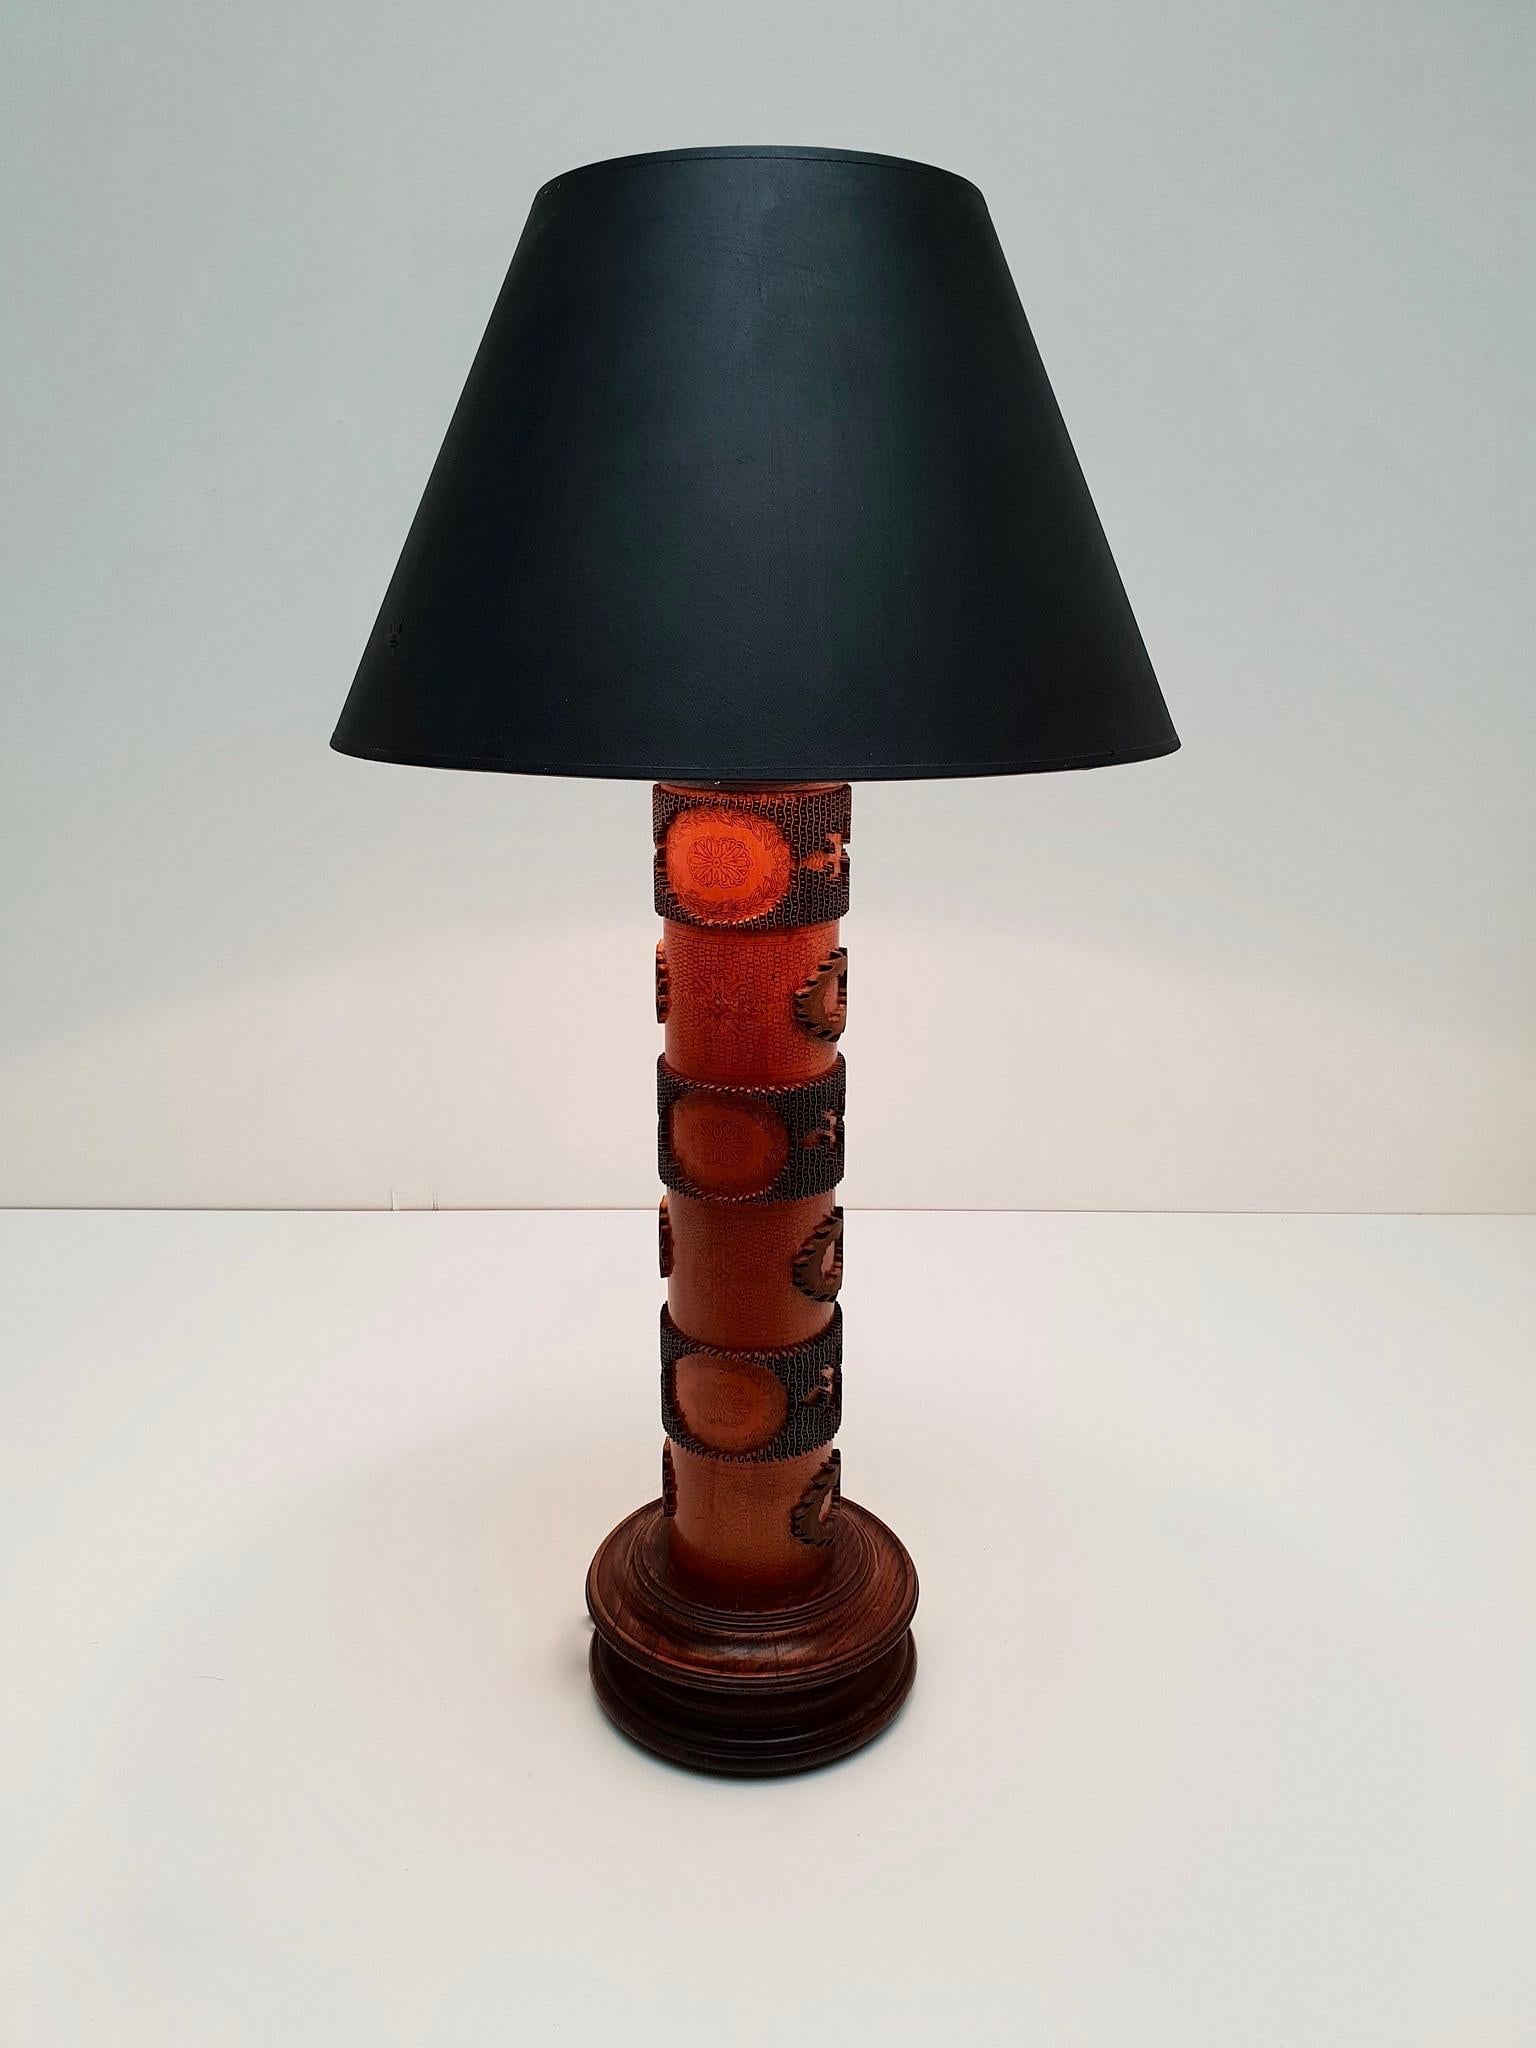 Table lamp in wood and brass made from an old stamp.
Measures: Height base 74 cm.
Diameter base 24 cm and 12 cm.
Height with black shade 95 cm. Diameter shade 50 cm.
Weight 5 kg.

The lamp shade are not included in the price.